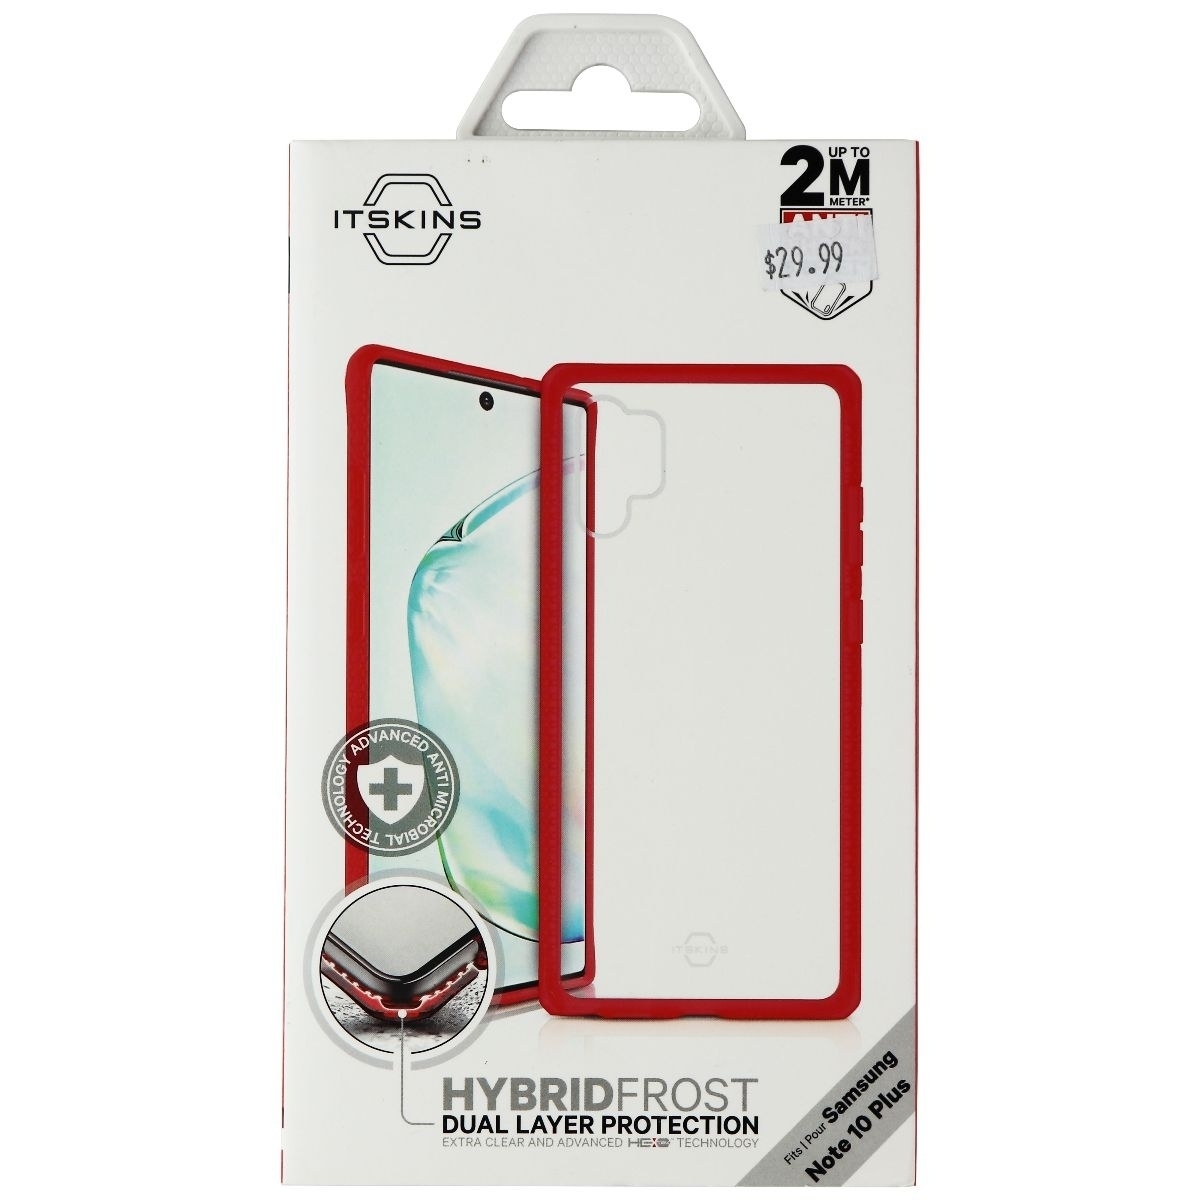 ITSKINS Hybrid Frost Dual Layer Case For Samsung Galaxy (Note10+) - Red/Clear